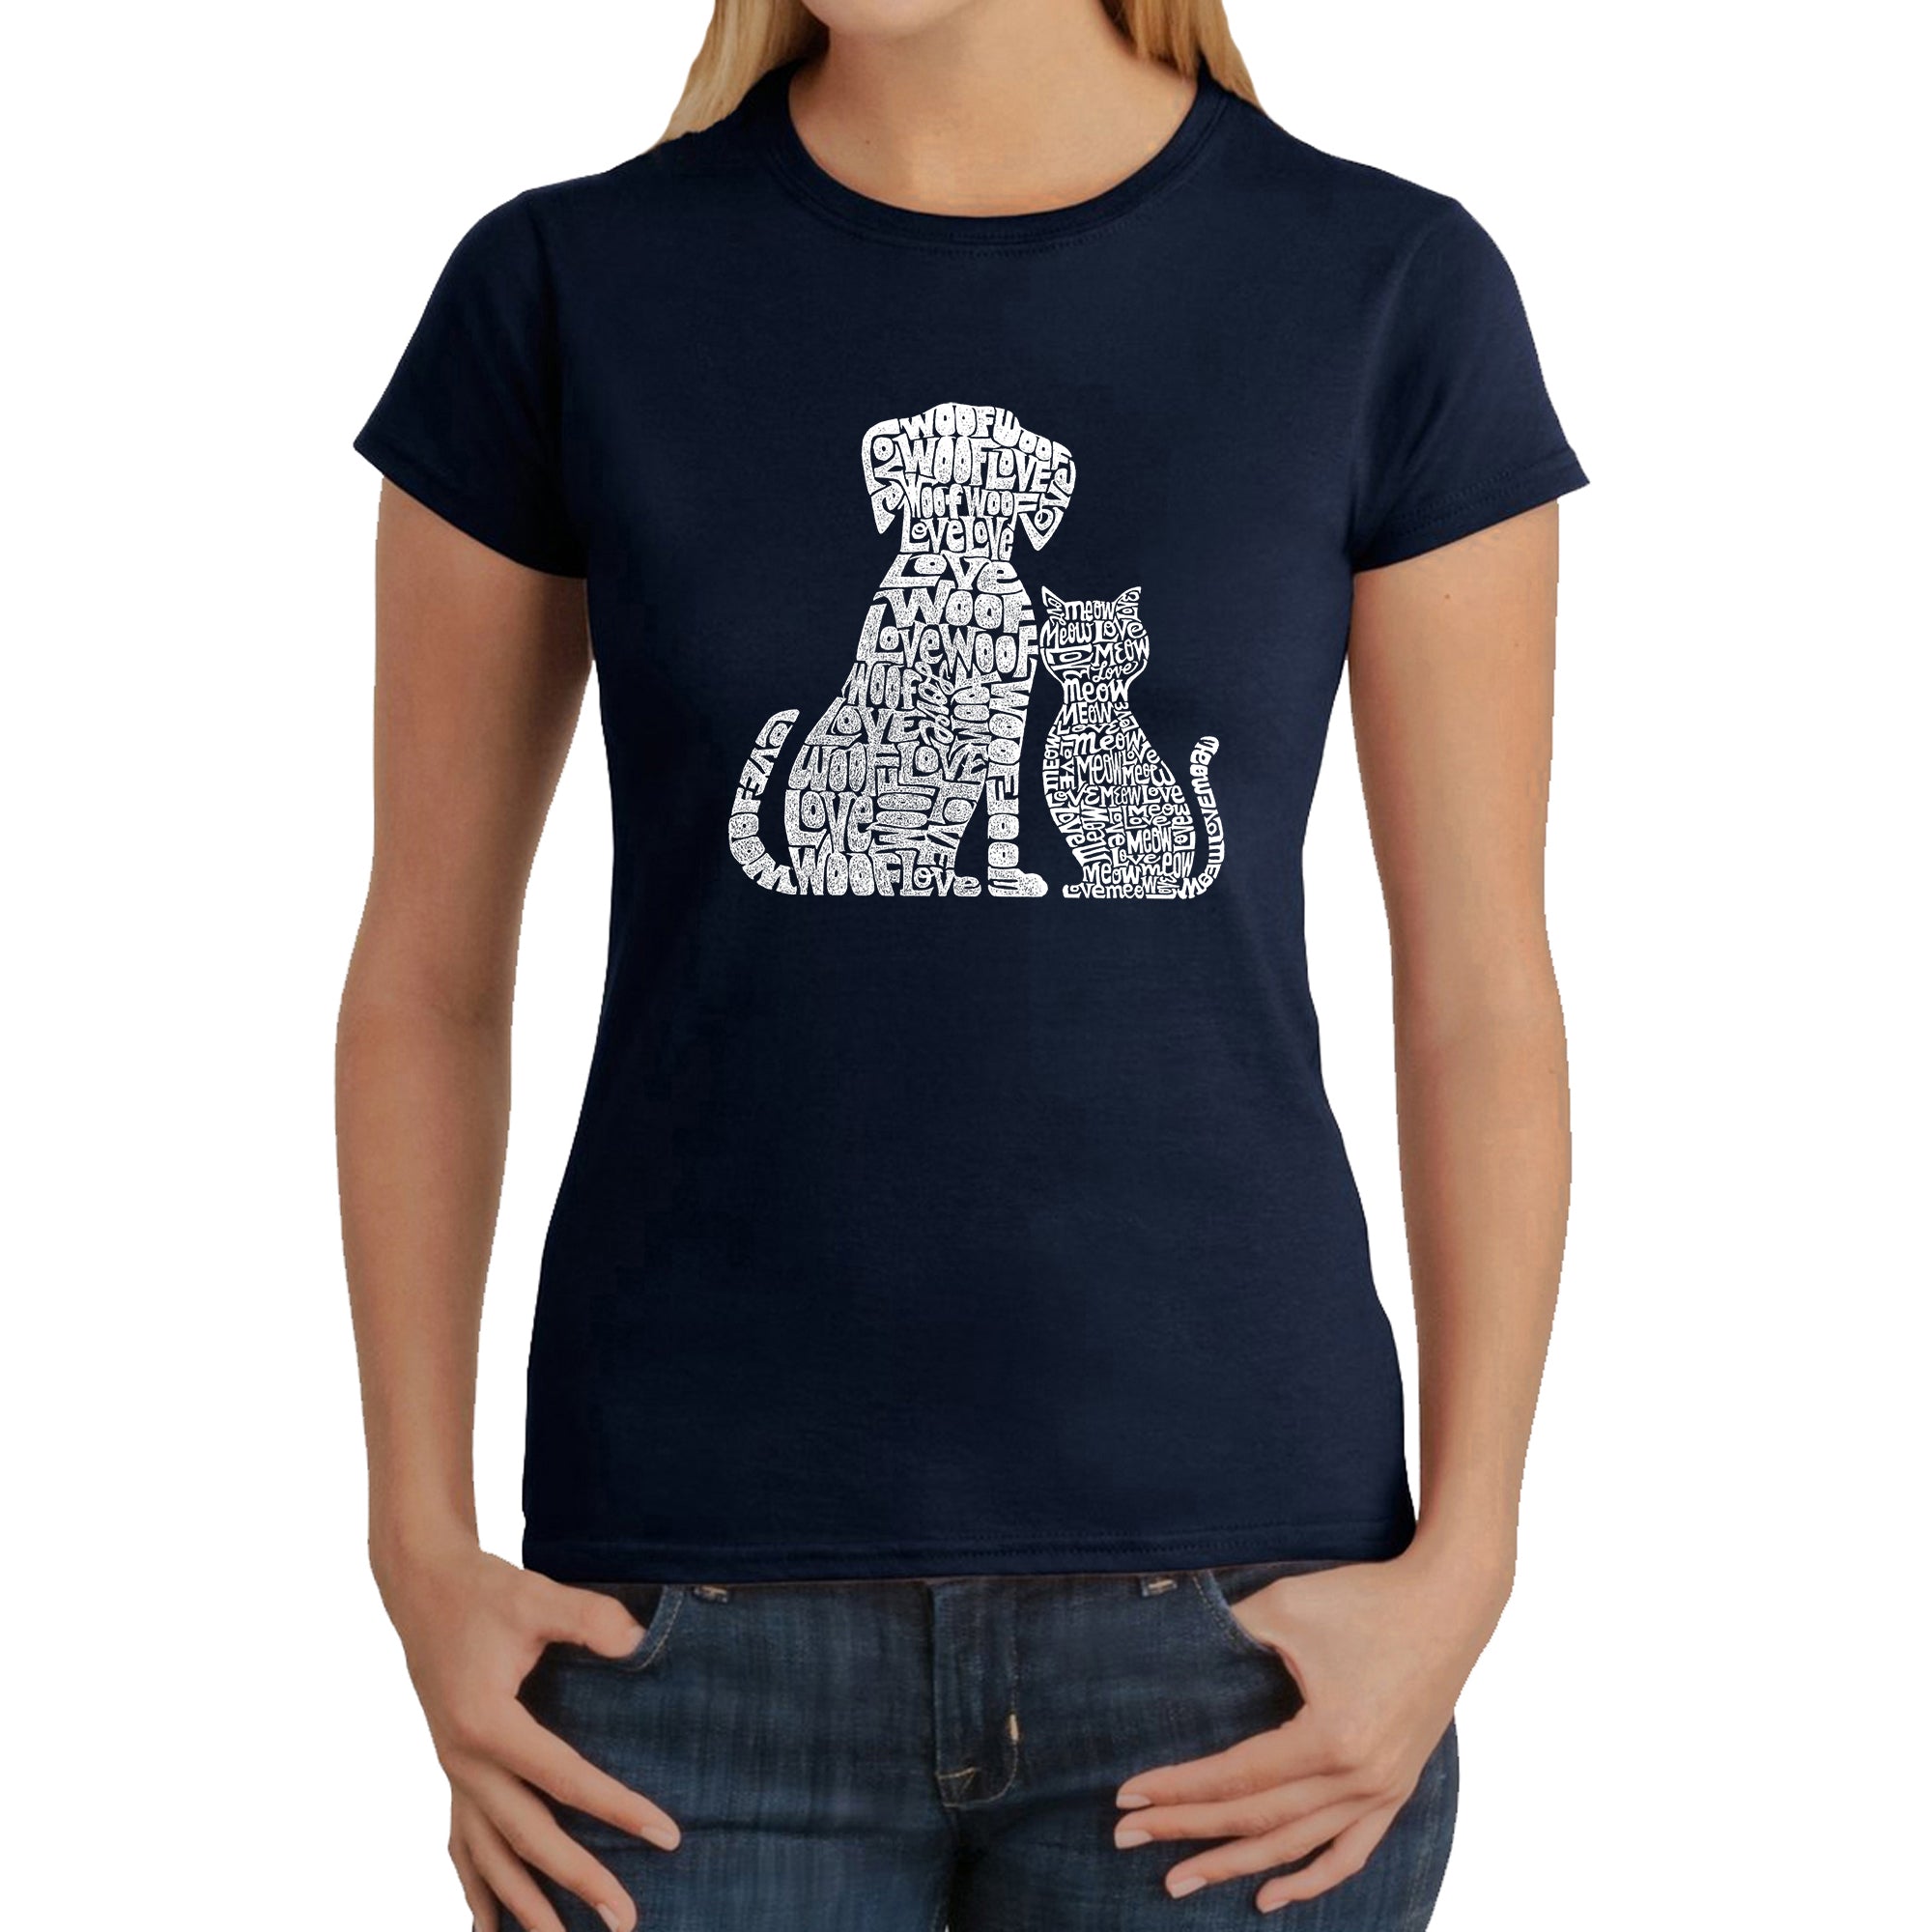 Dogs And Cats - Women's Word Art T-Shirt - Navy - Large